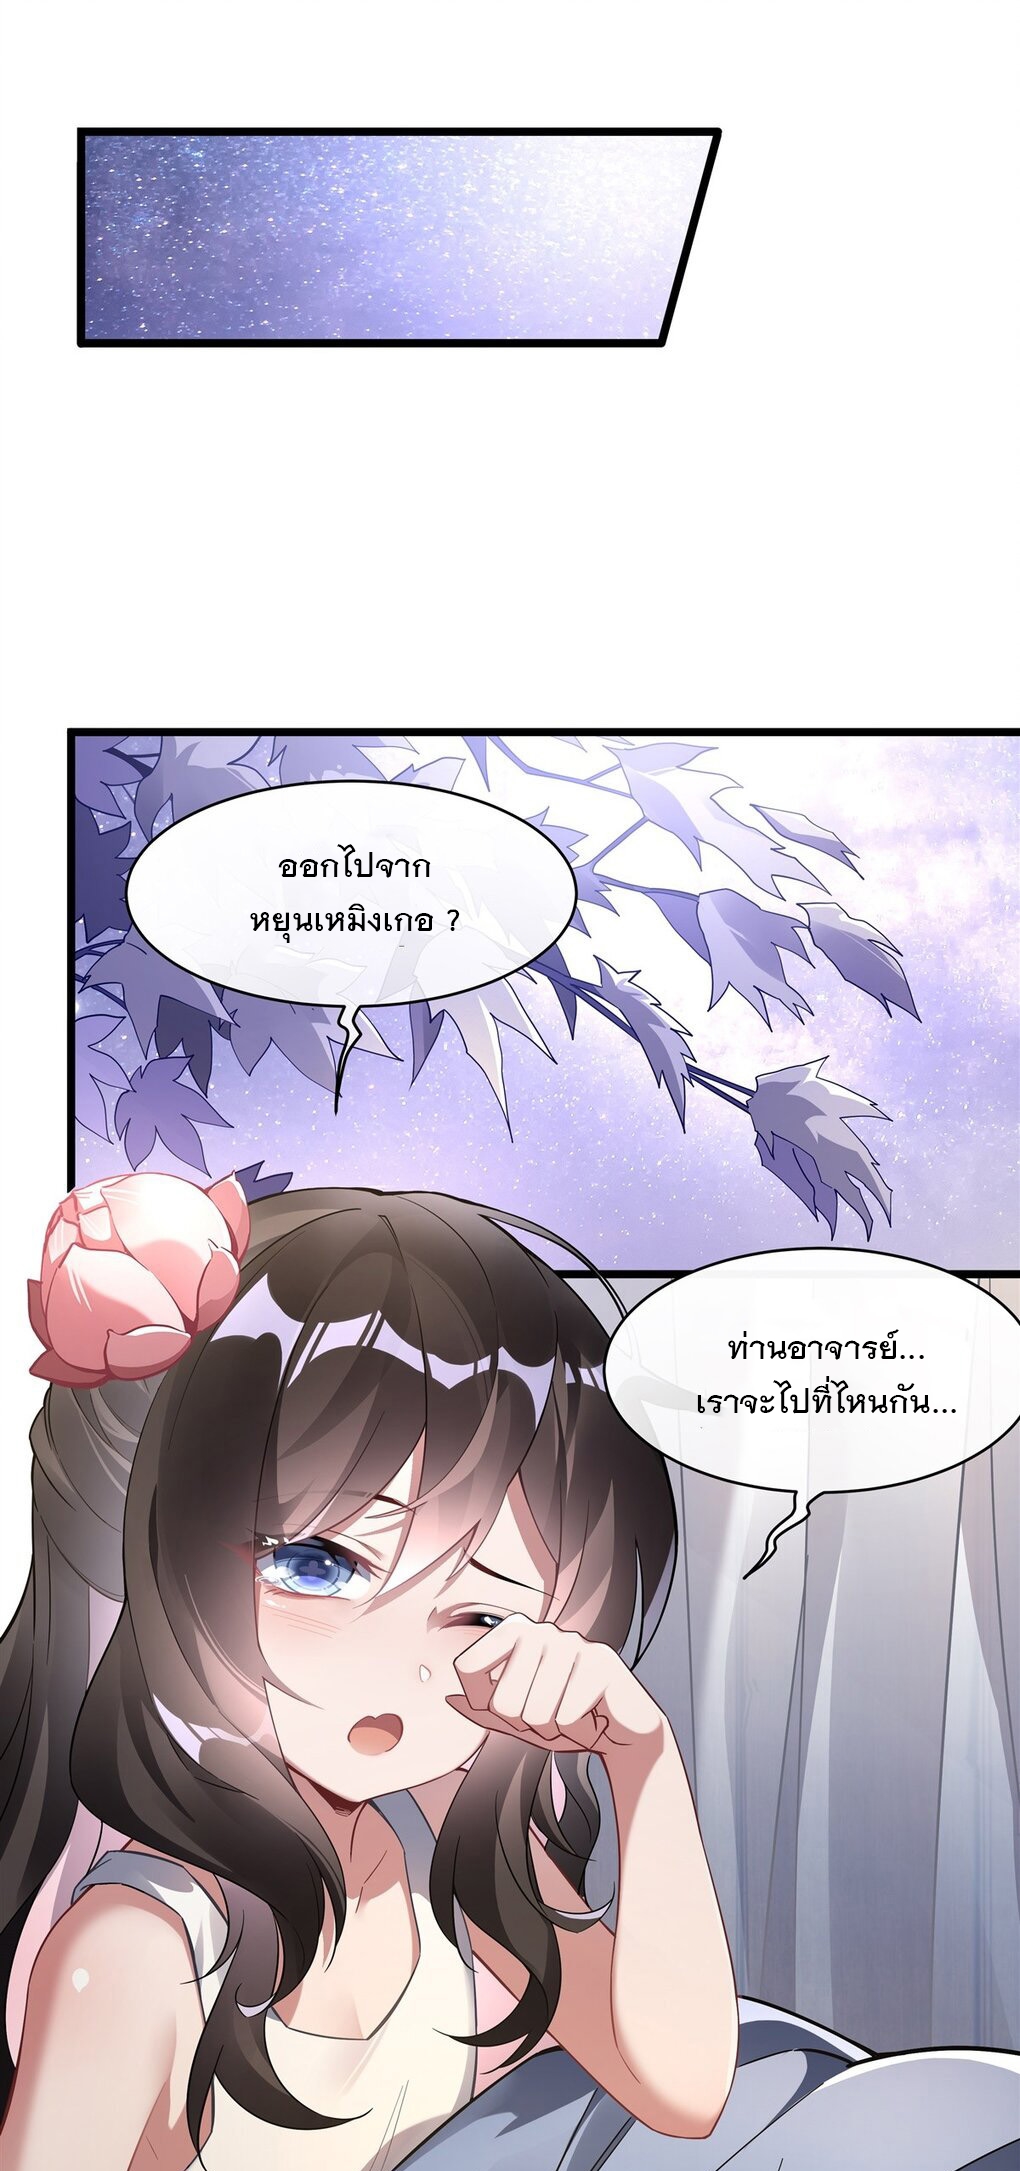 My Female Apprentices Are All Big Shots From the Future Ã Â¸â€¢Ã Â¸Â­Ã Â¸â„¢Ã Â¸â€”Ã Â¸ÂµÃ Â¹Ë† 95 (25)